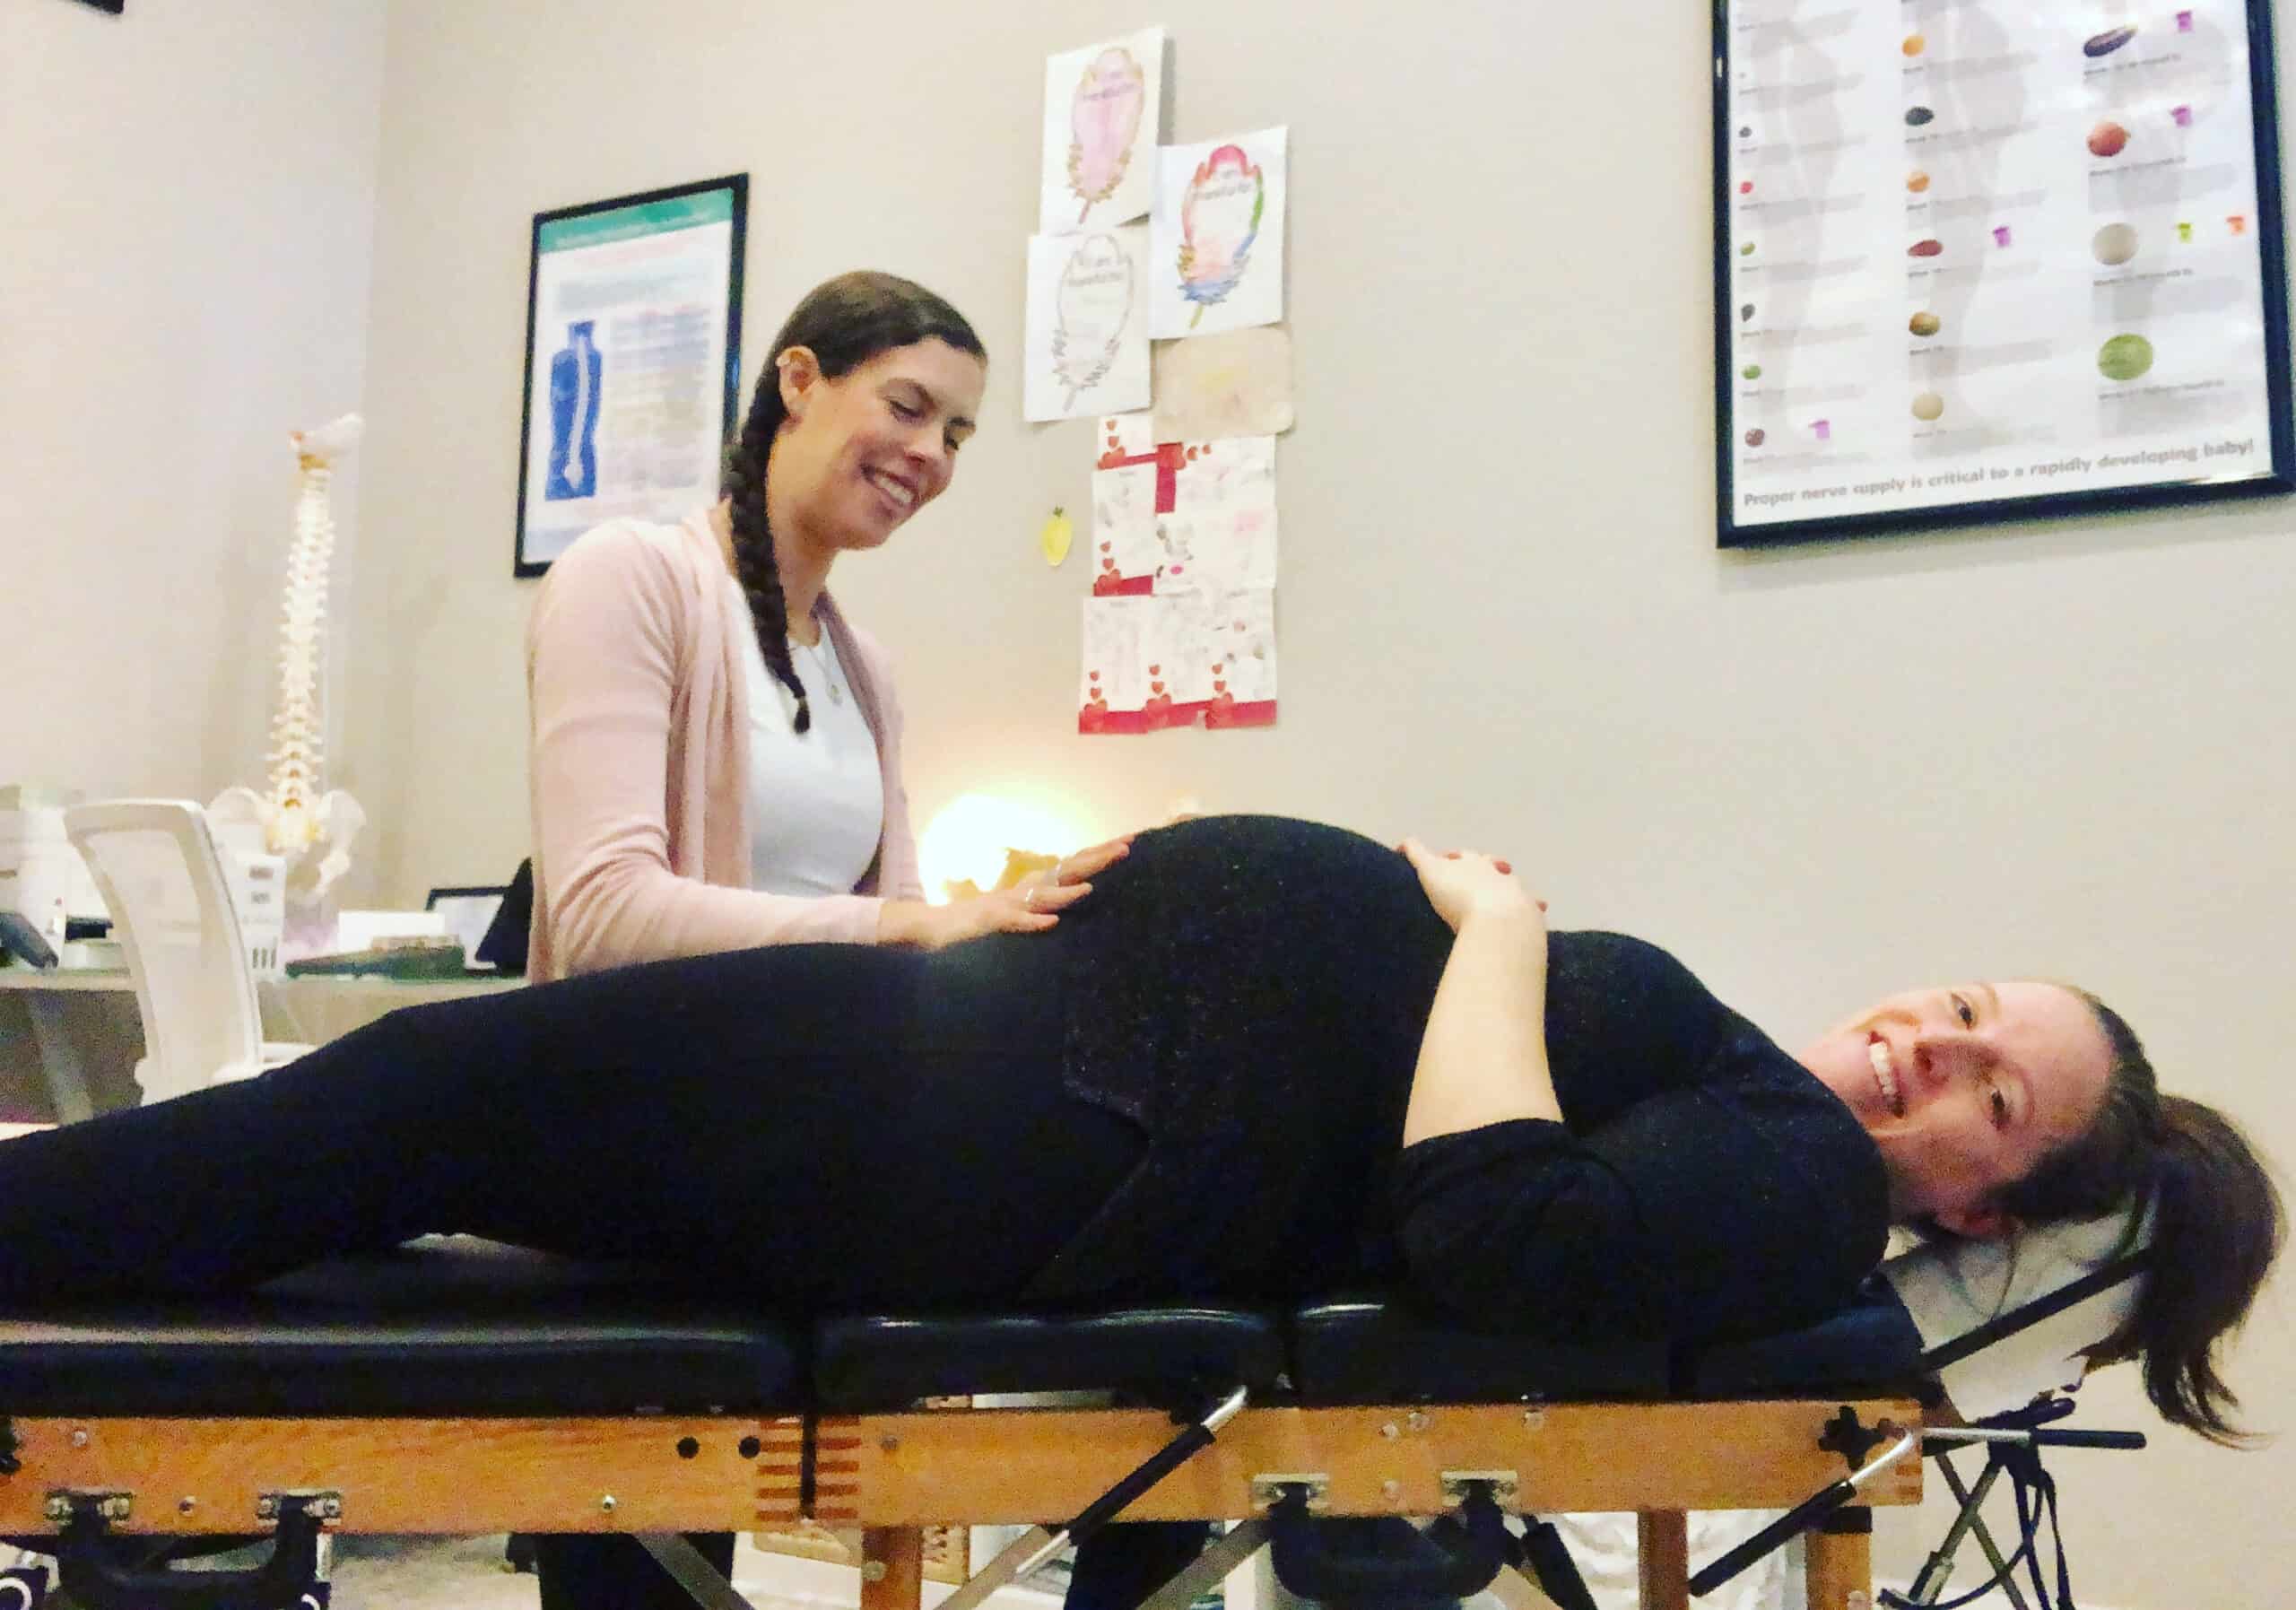 Back pain during pregnancy? How a Chiro can help you